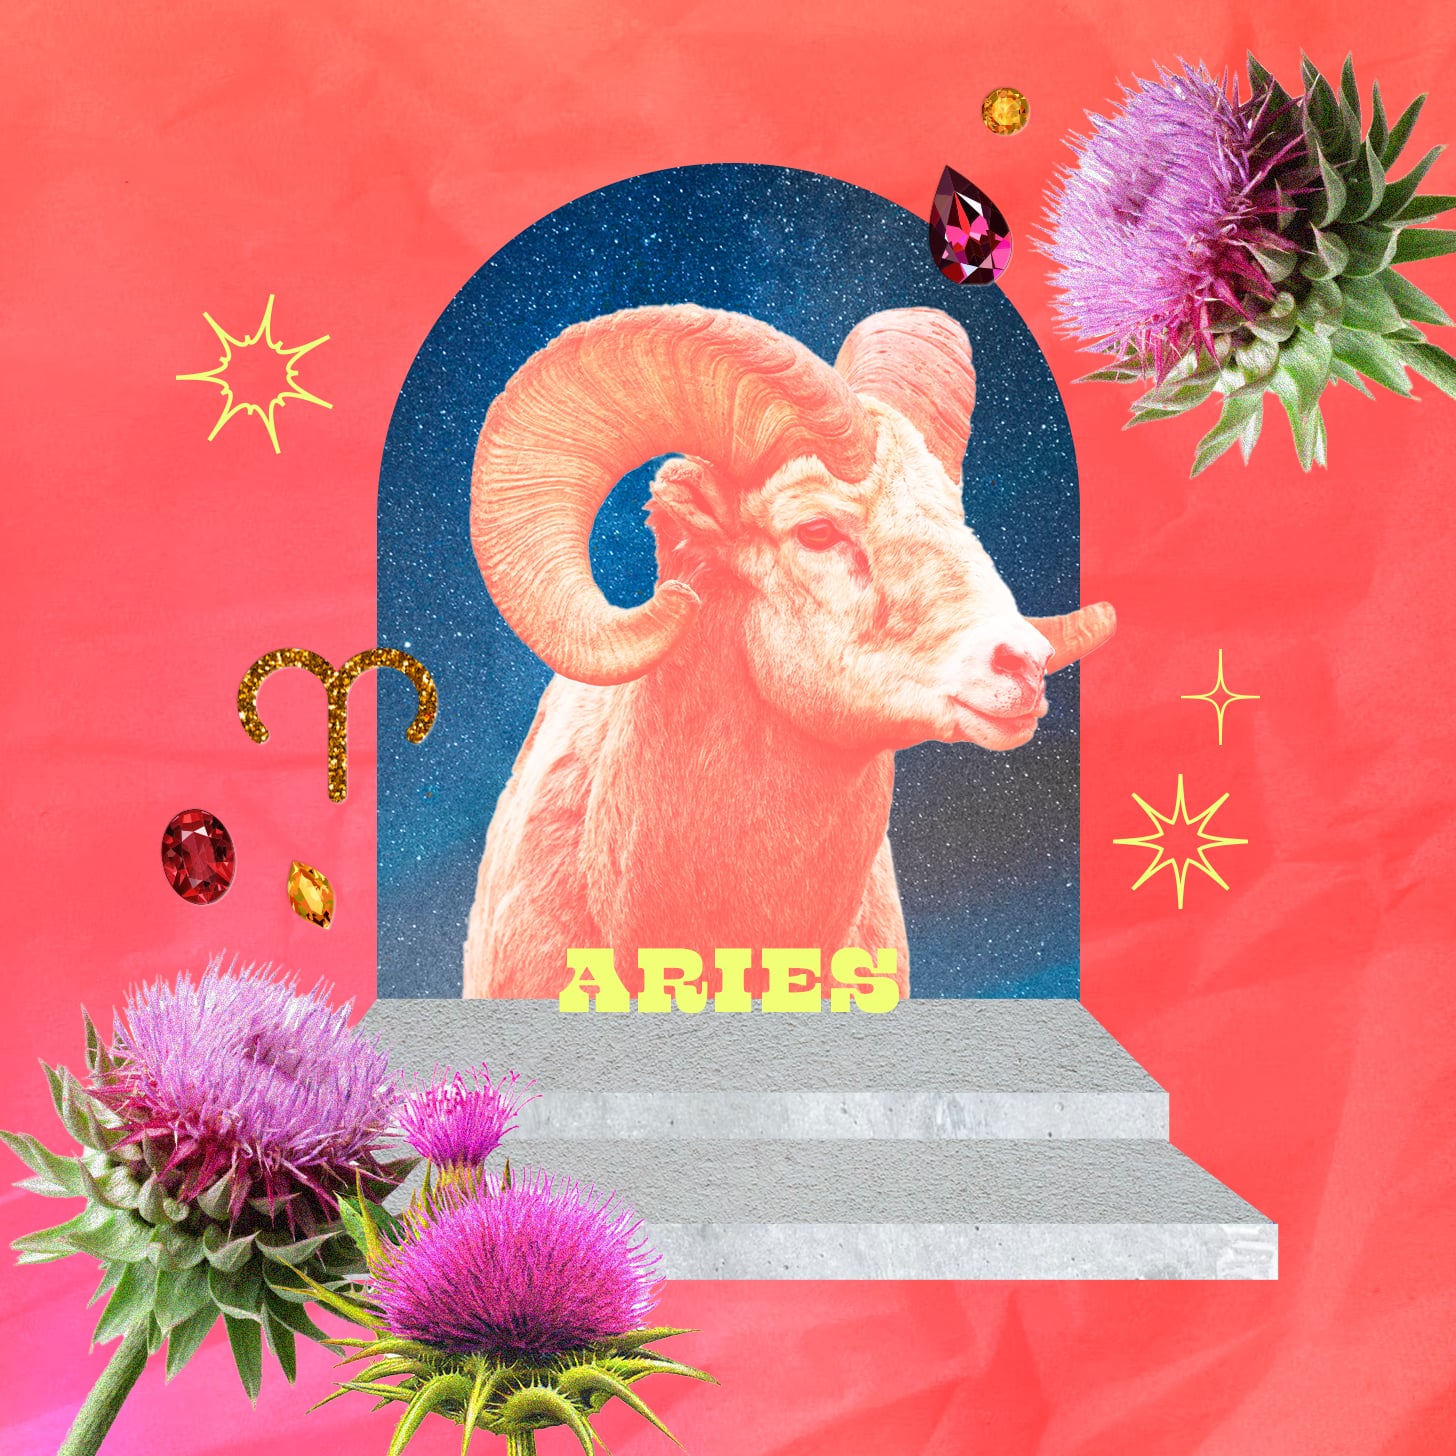 aries weekly horoscope for may 29, 2022